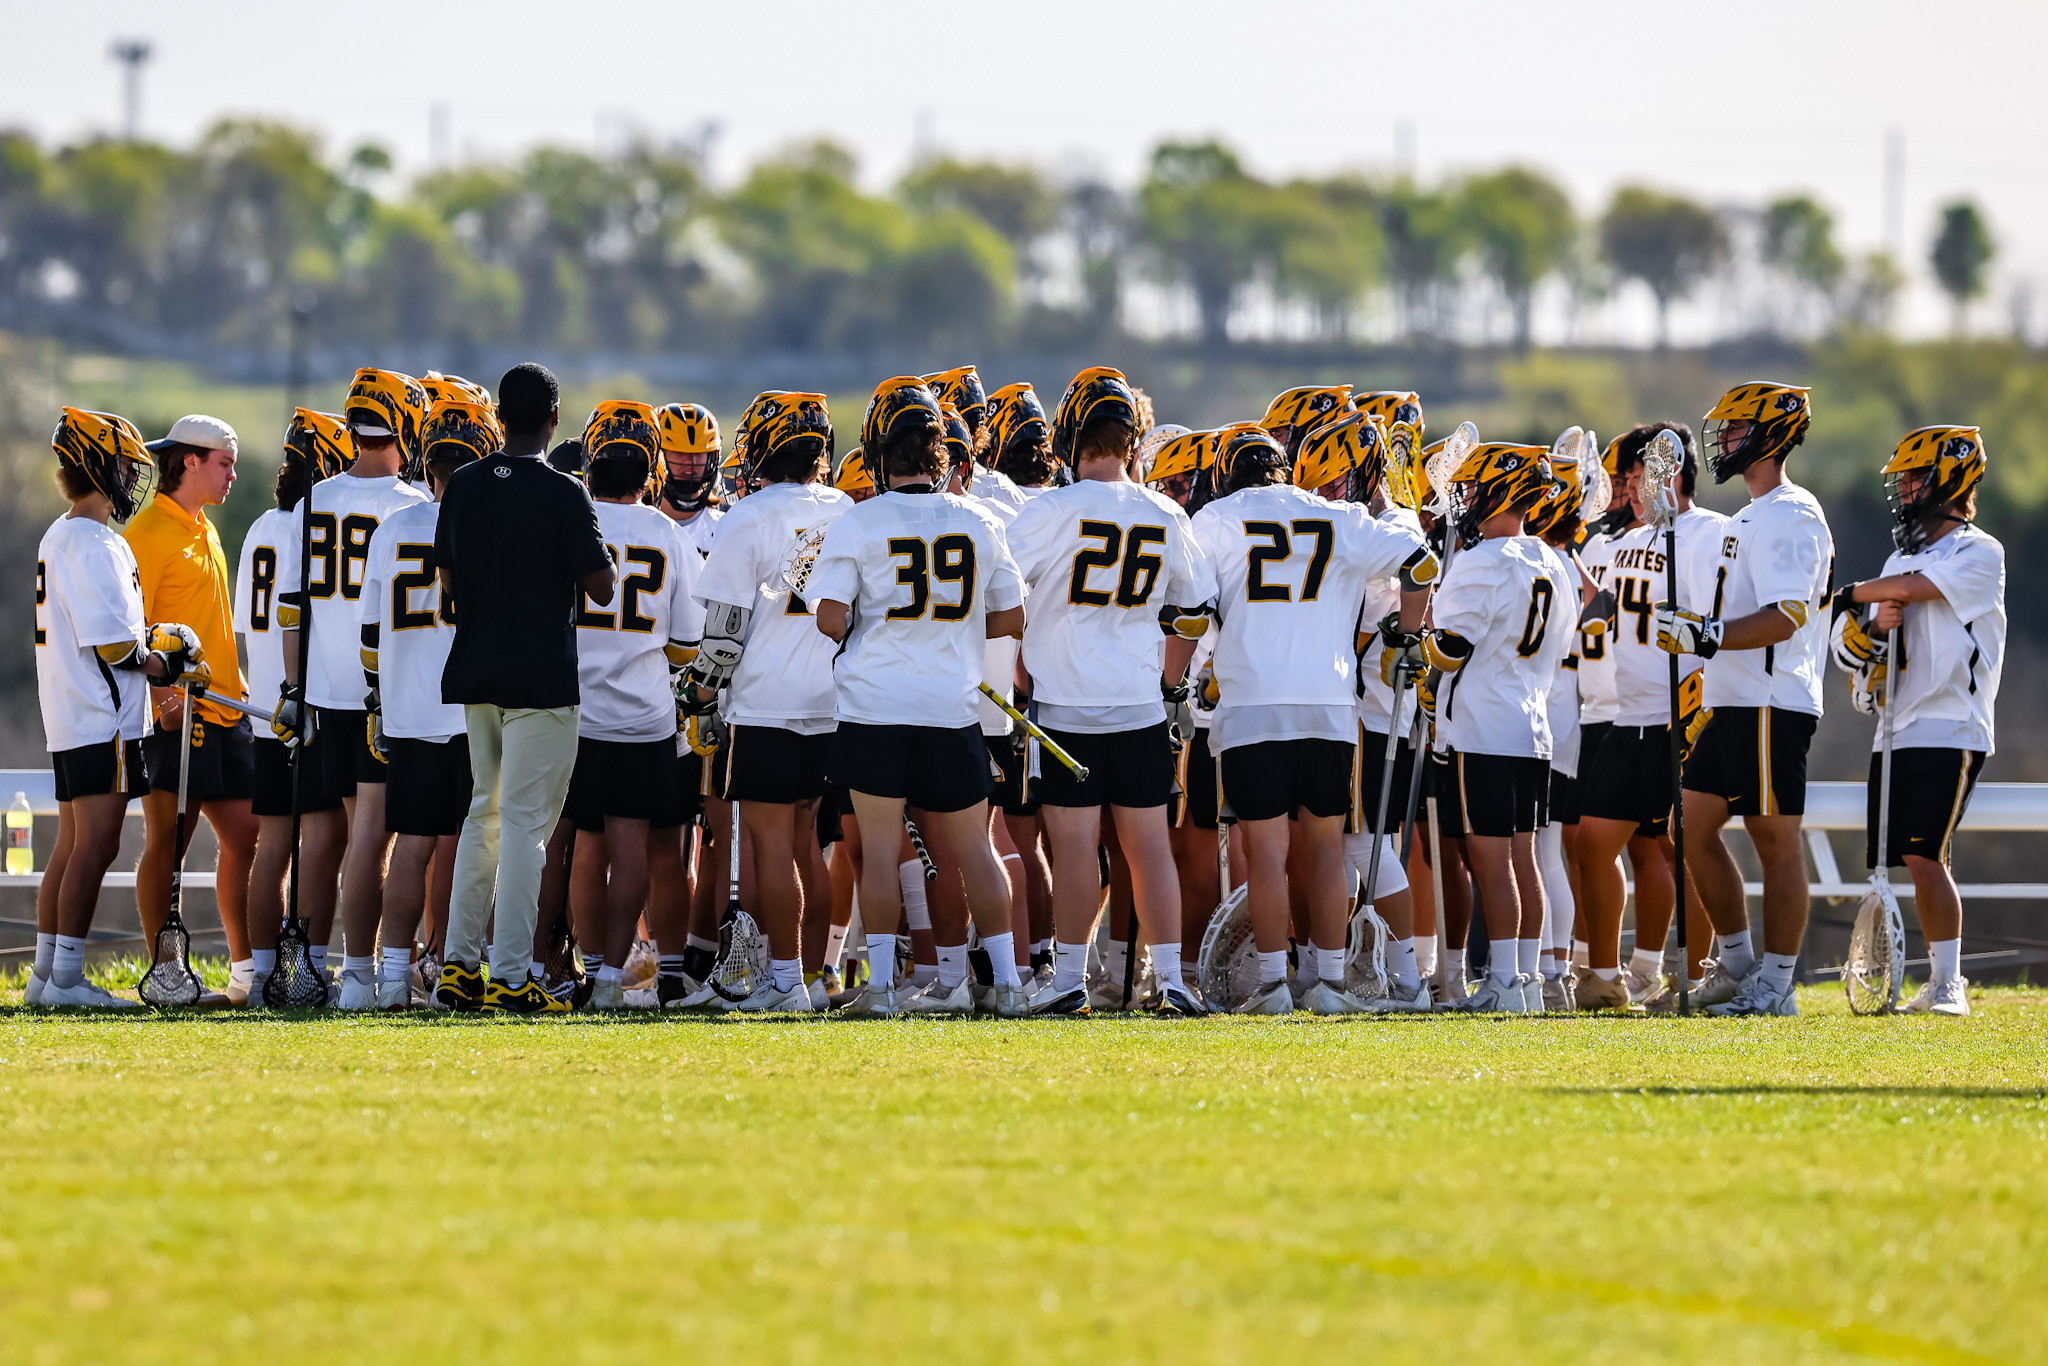 Men's Lacrosse Beaten by Colorado College in HCLC Championship